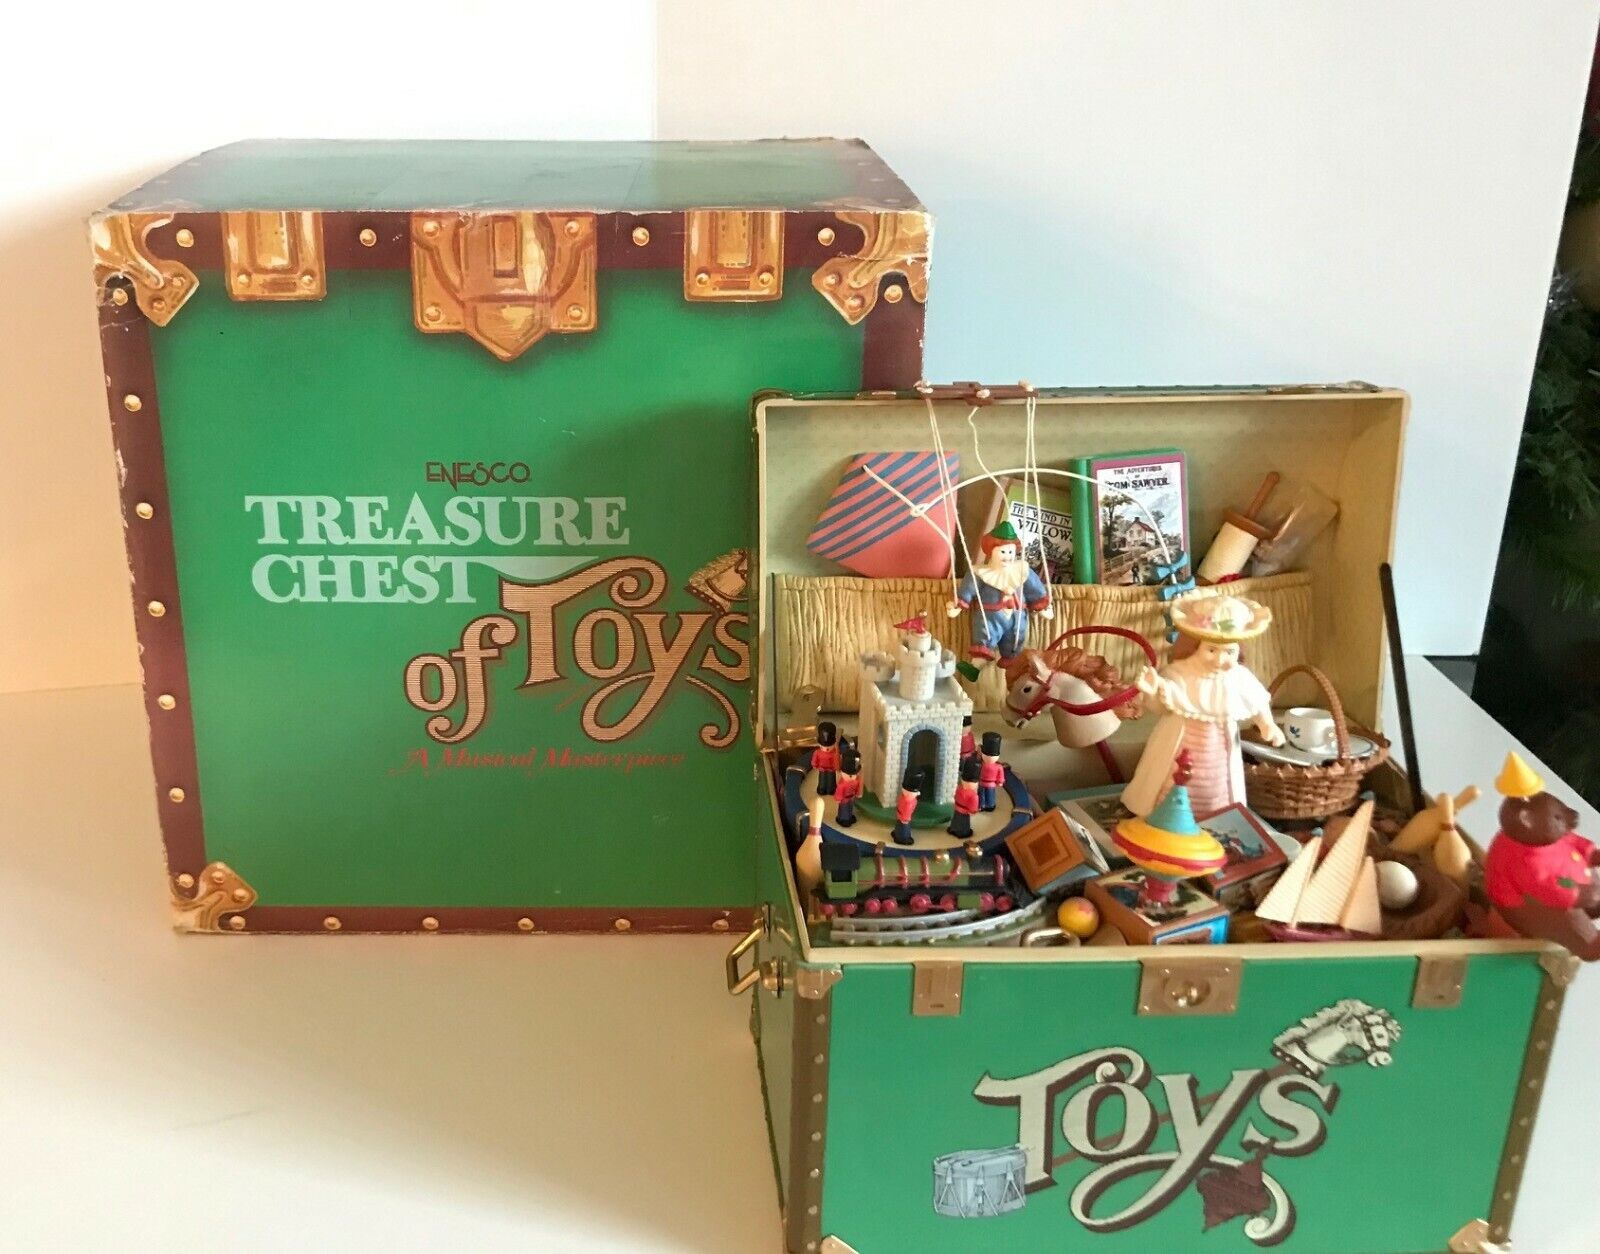 Enesco ‘Treasure Chest of Toys’ Animated Music Box with box: plays Toy Symphony